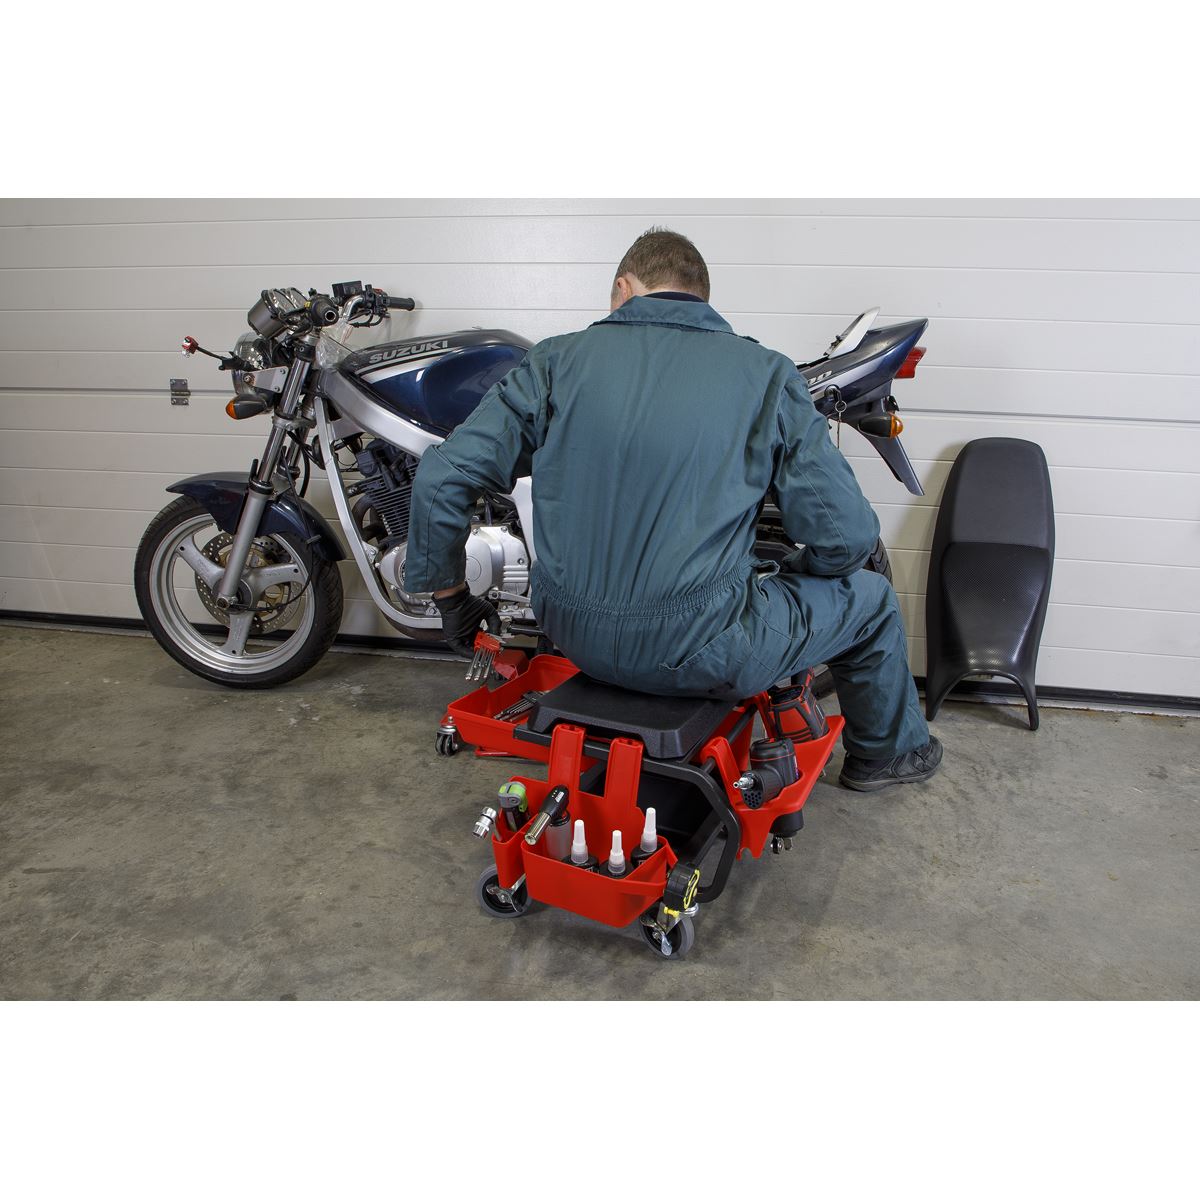 Sealey Mechanic's Deluxe Detailing Utility Seat